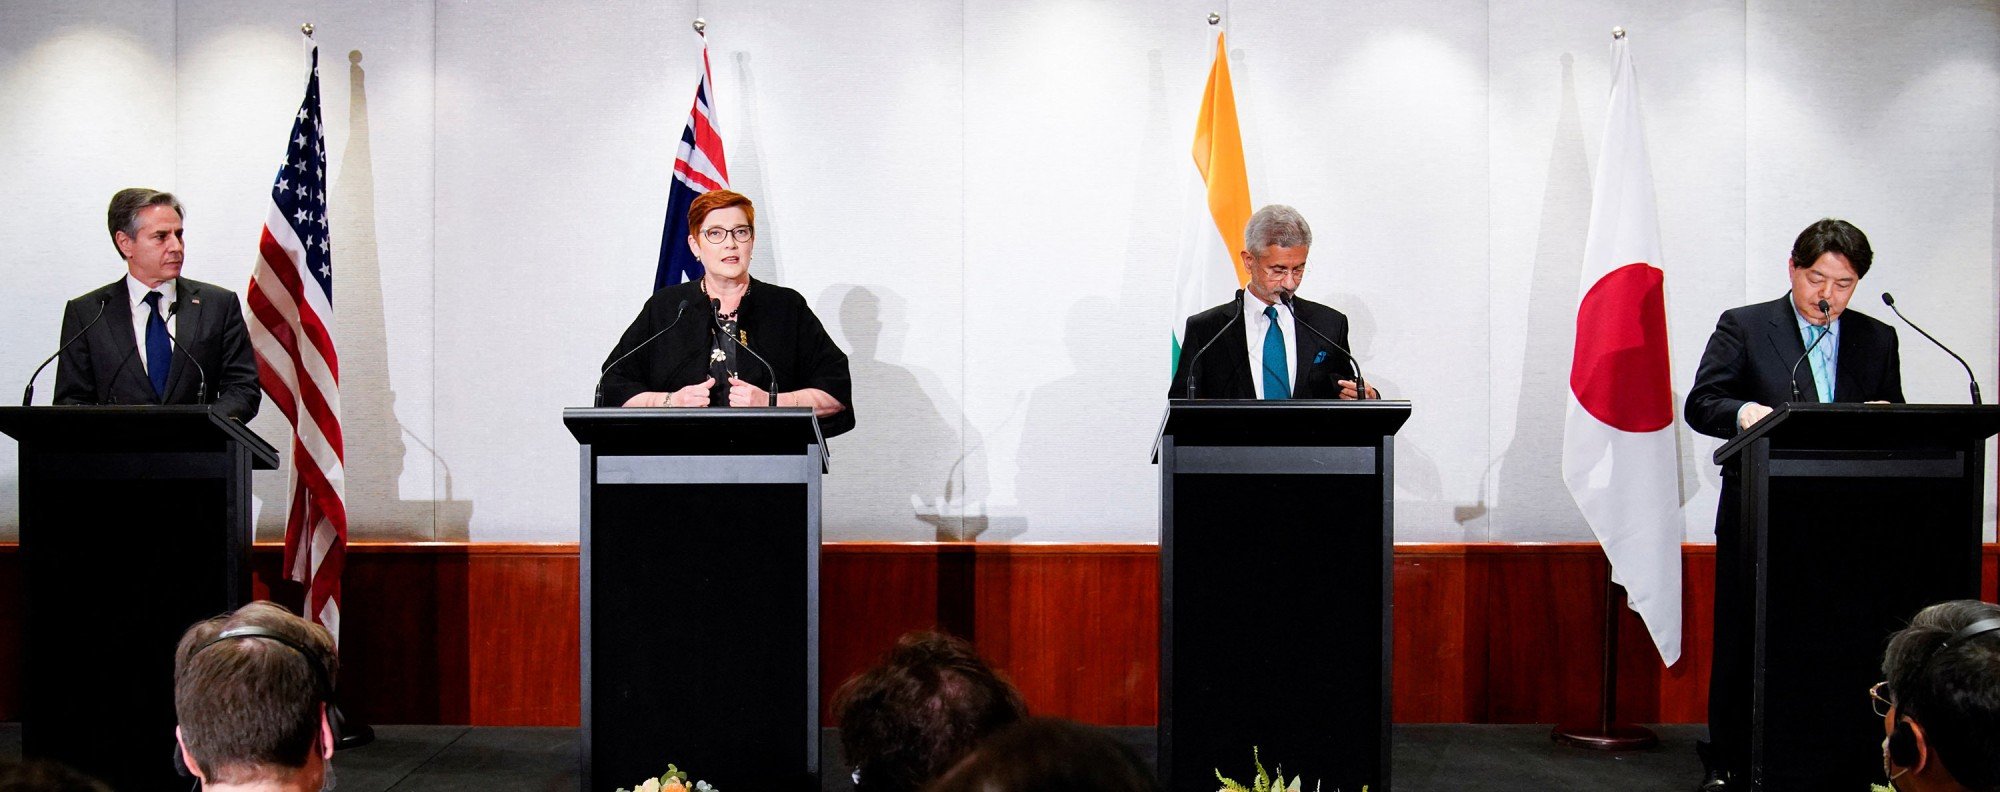 (l-r) US Secretary of State Antony Blinken, Australian Foreign Minister Marise Payne, Indian Foreign Minister Subrahmanyam Jaishankar and Japanese Foreign Minister Yoshimasa Hayashi are seen during a press conference of the Quadrilateral Security Dialogue (Quad) foreign ministers in Melbourne, Australia, on February 11, 2022. Photo: Reuters